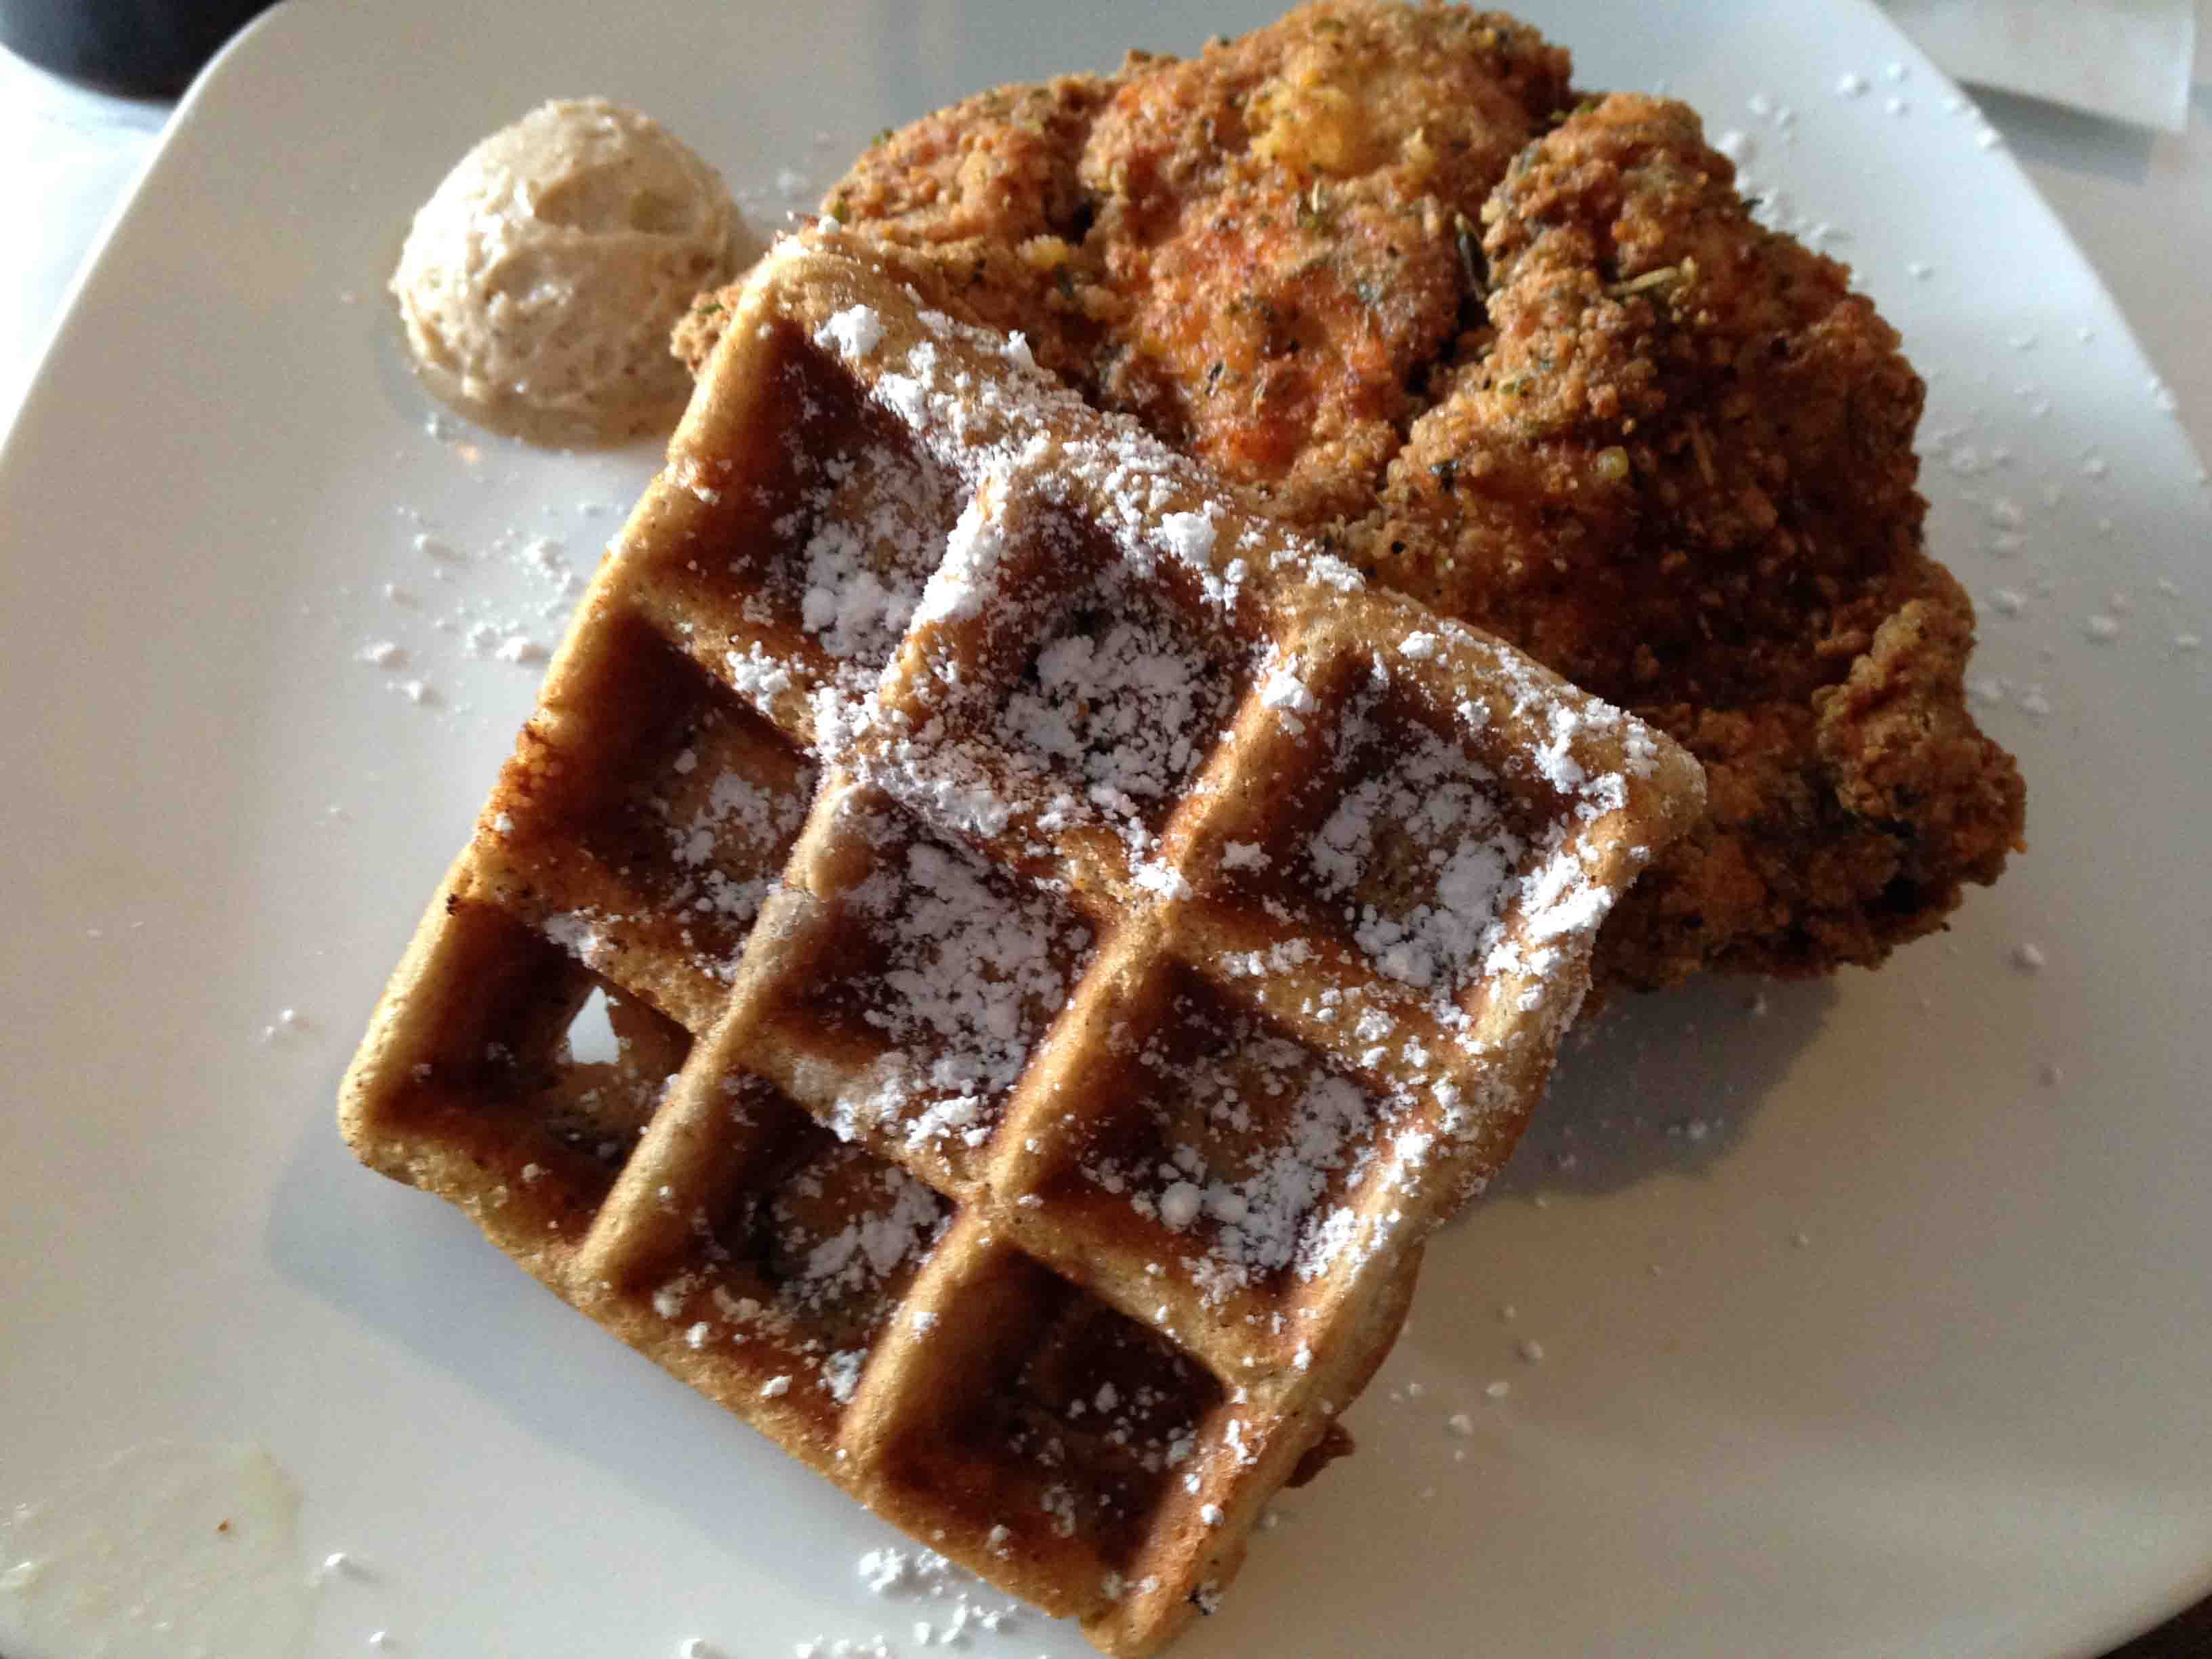 Dame's world famous chicken and waffles is not to be missed in Durham!